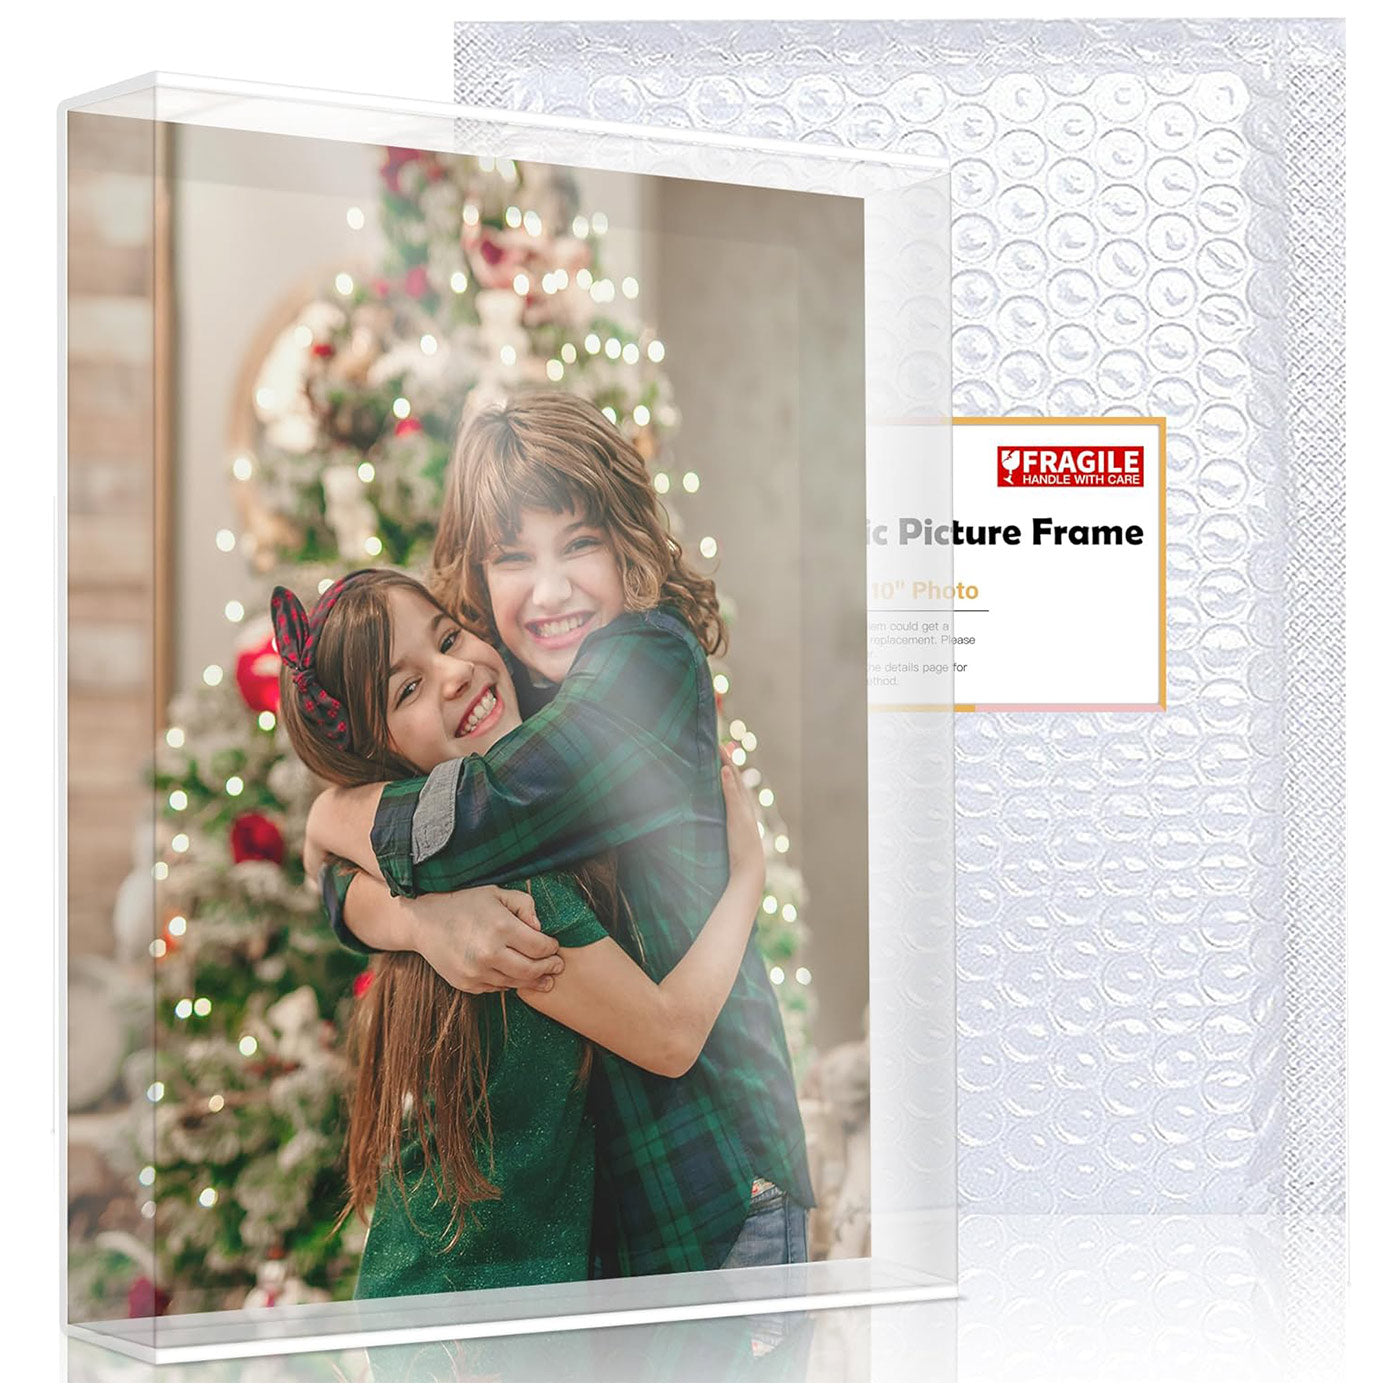 KOALA Acrylic Picture Photo Frame Double Sided Frameless Desktop Floating Display 8x10 inches 1 pack